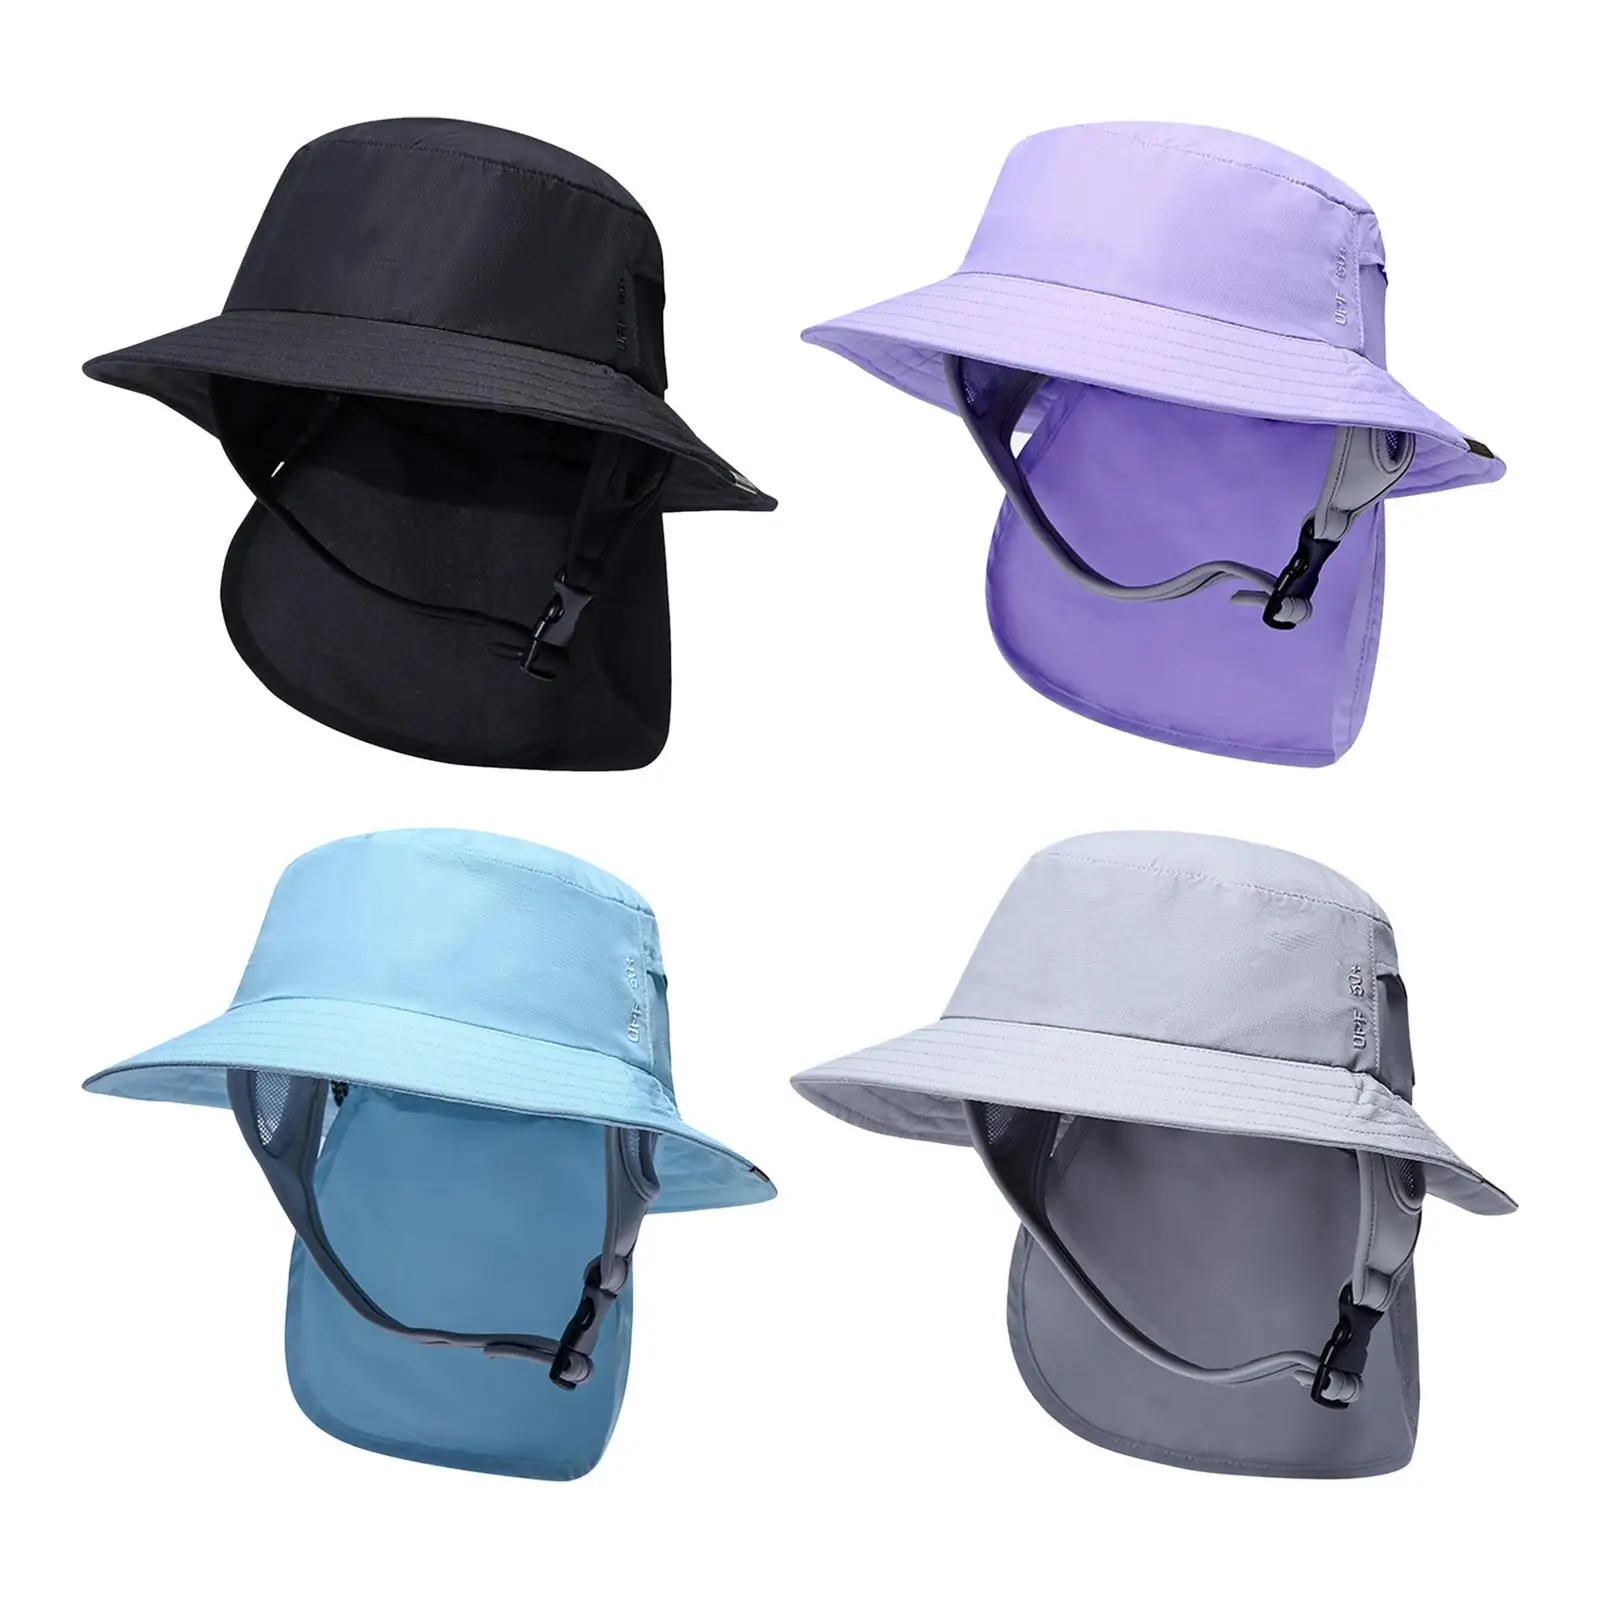 Lightweight Surf Bucket Hat Neck Flap Cover for Fishing Travel Water Sports